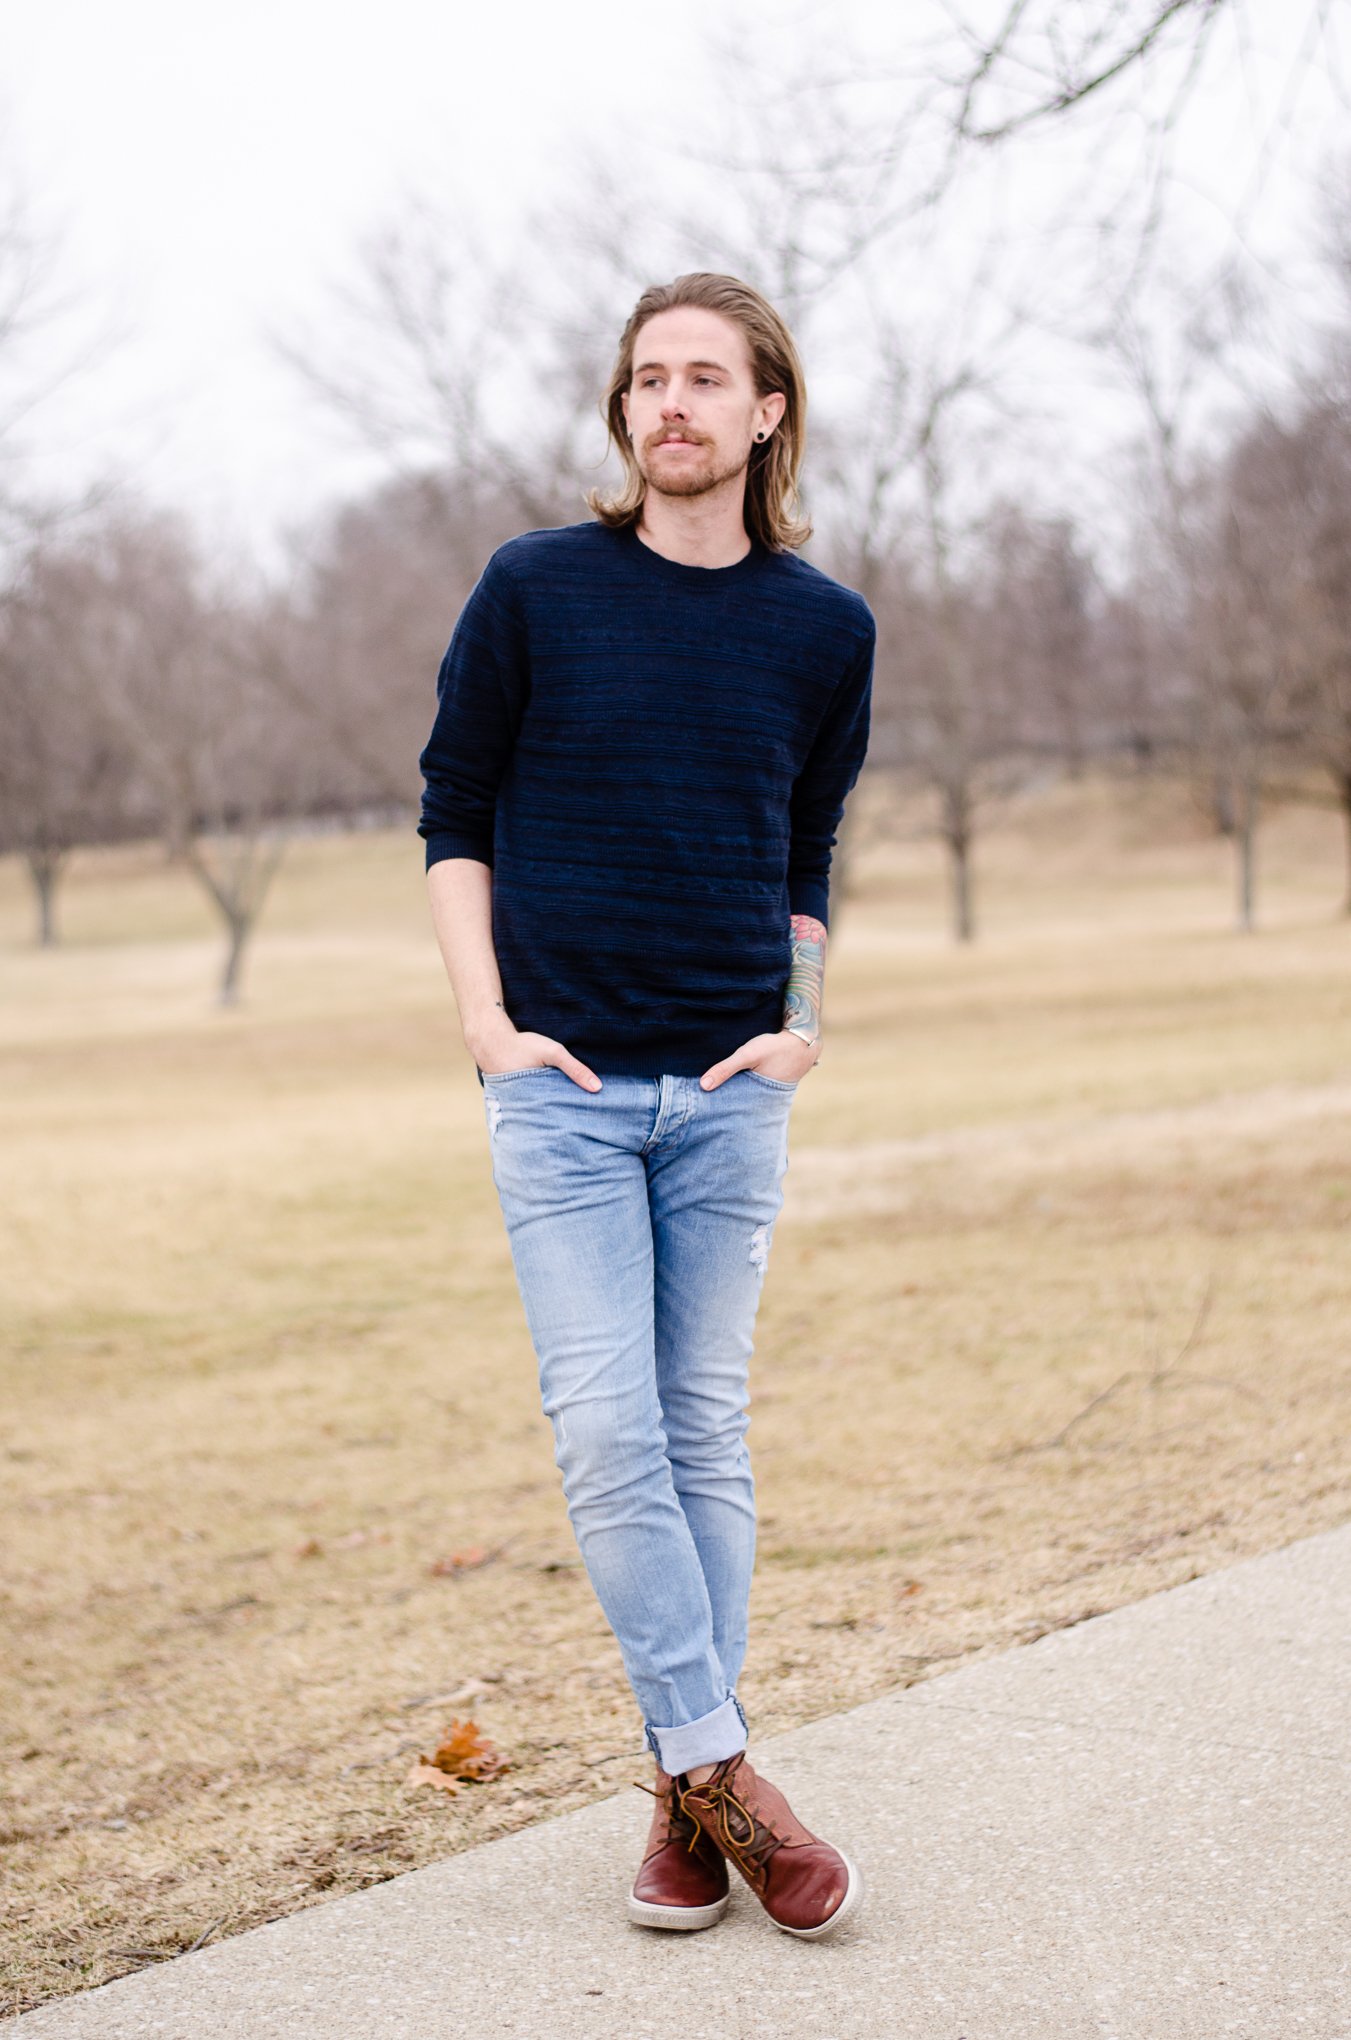 The Kentucky Gent, men's fashion and lifestyle blogger, gears up for NYFW.